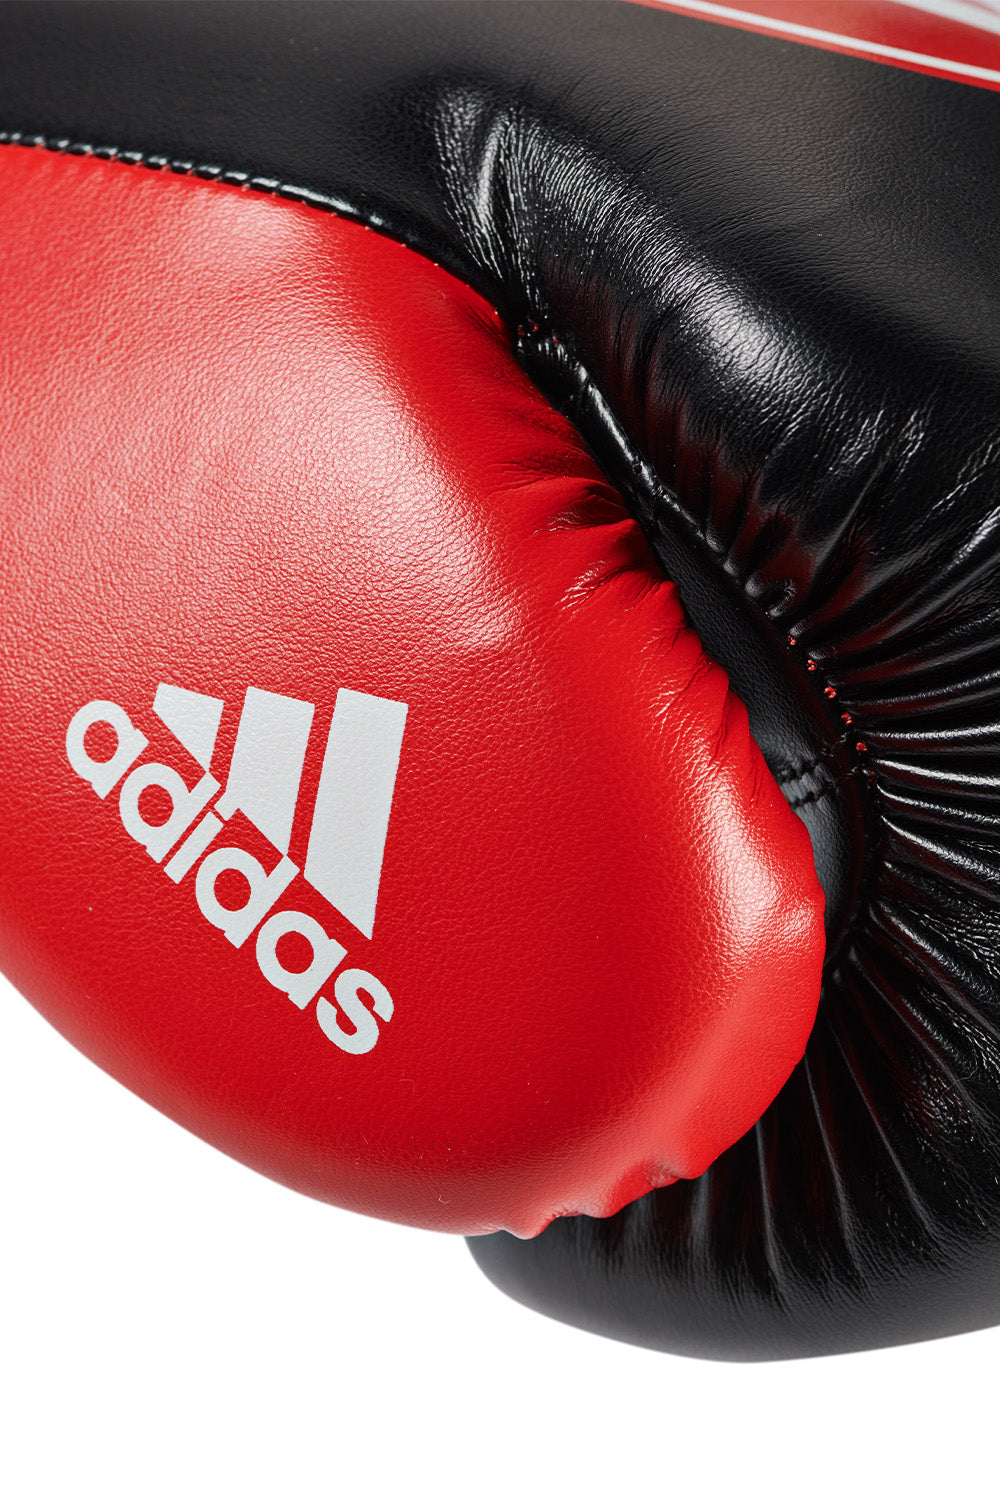 GB Cross Training Boxing Gloves by Adidas® - Red